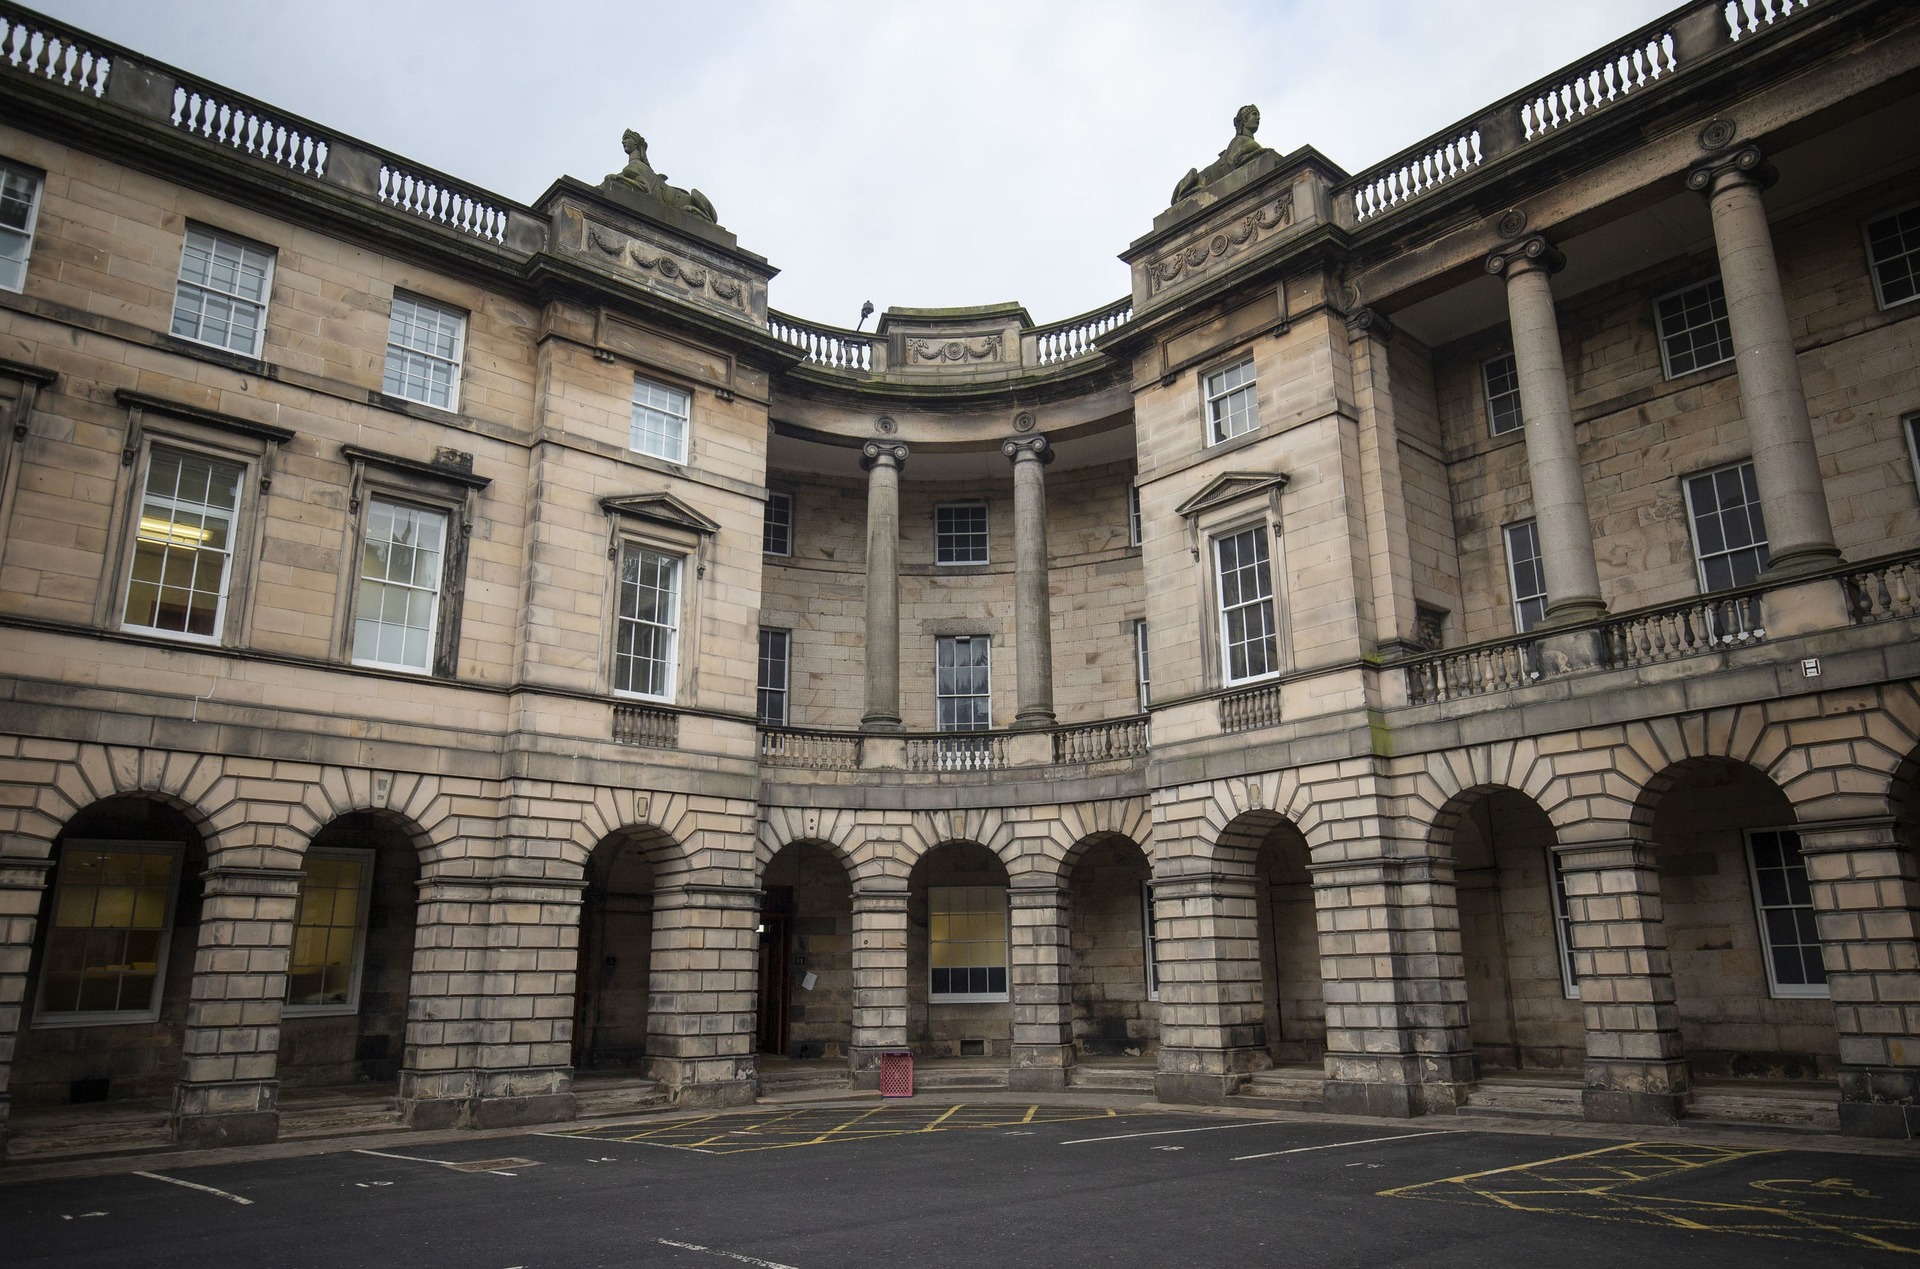 The hearing took place at the Court of Session in Edinburgh.